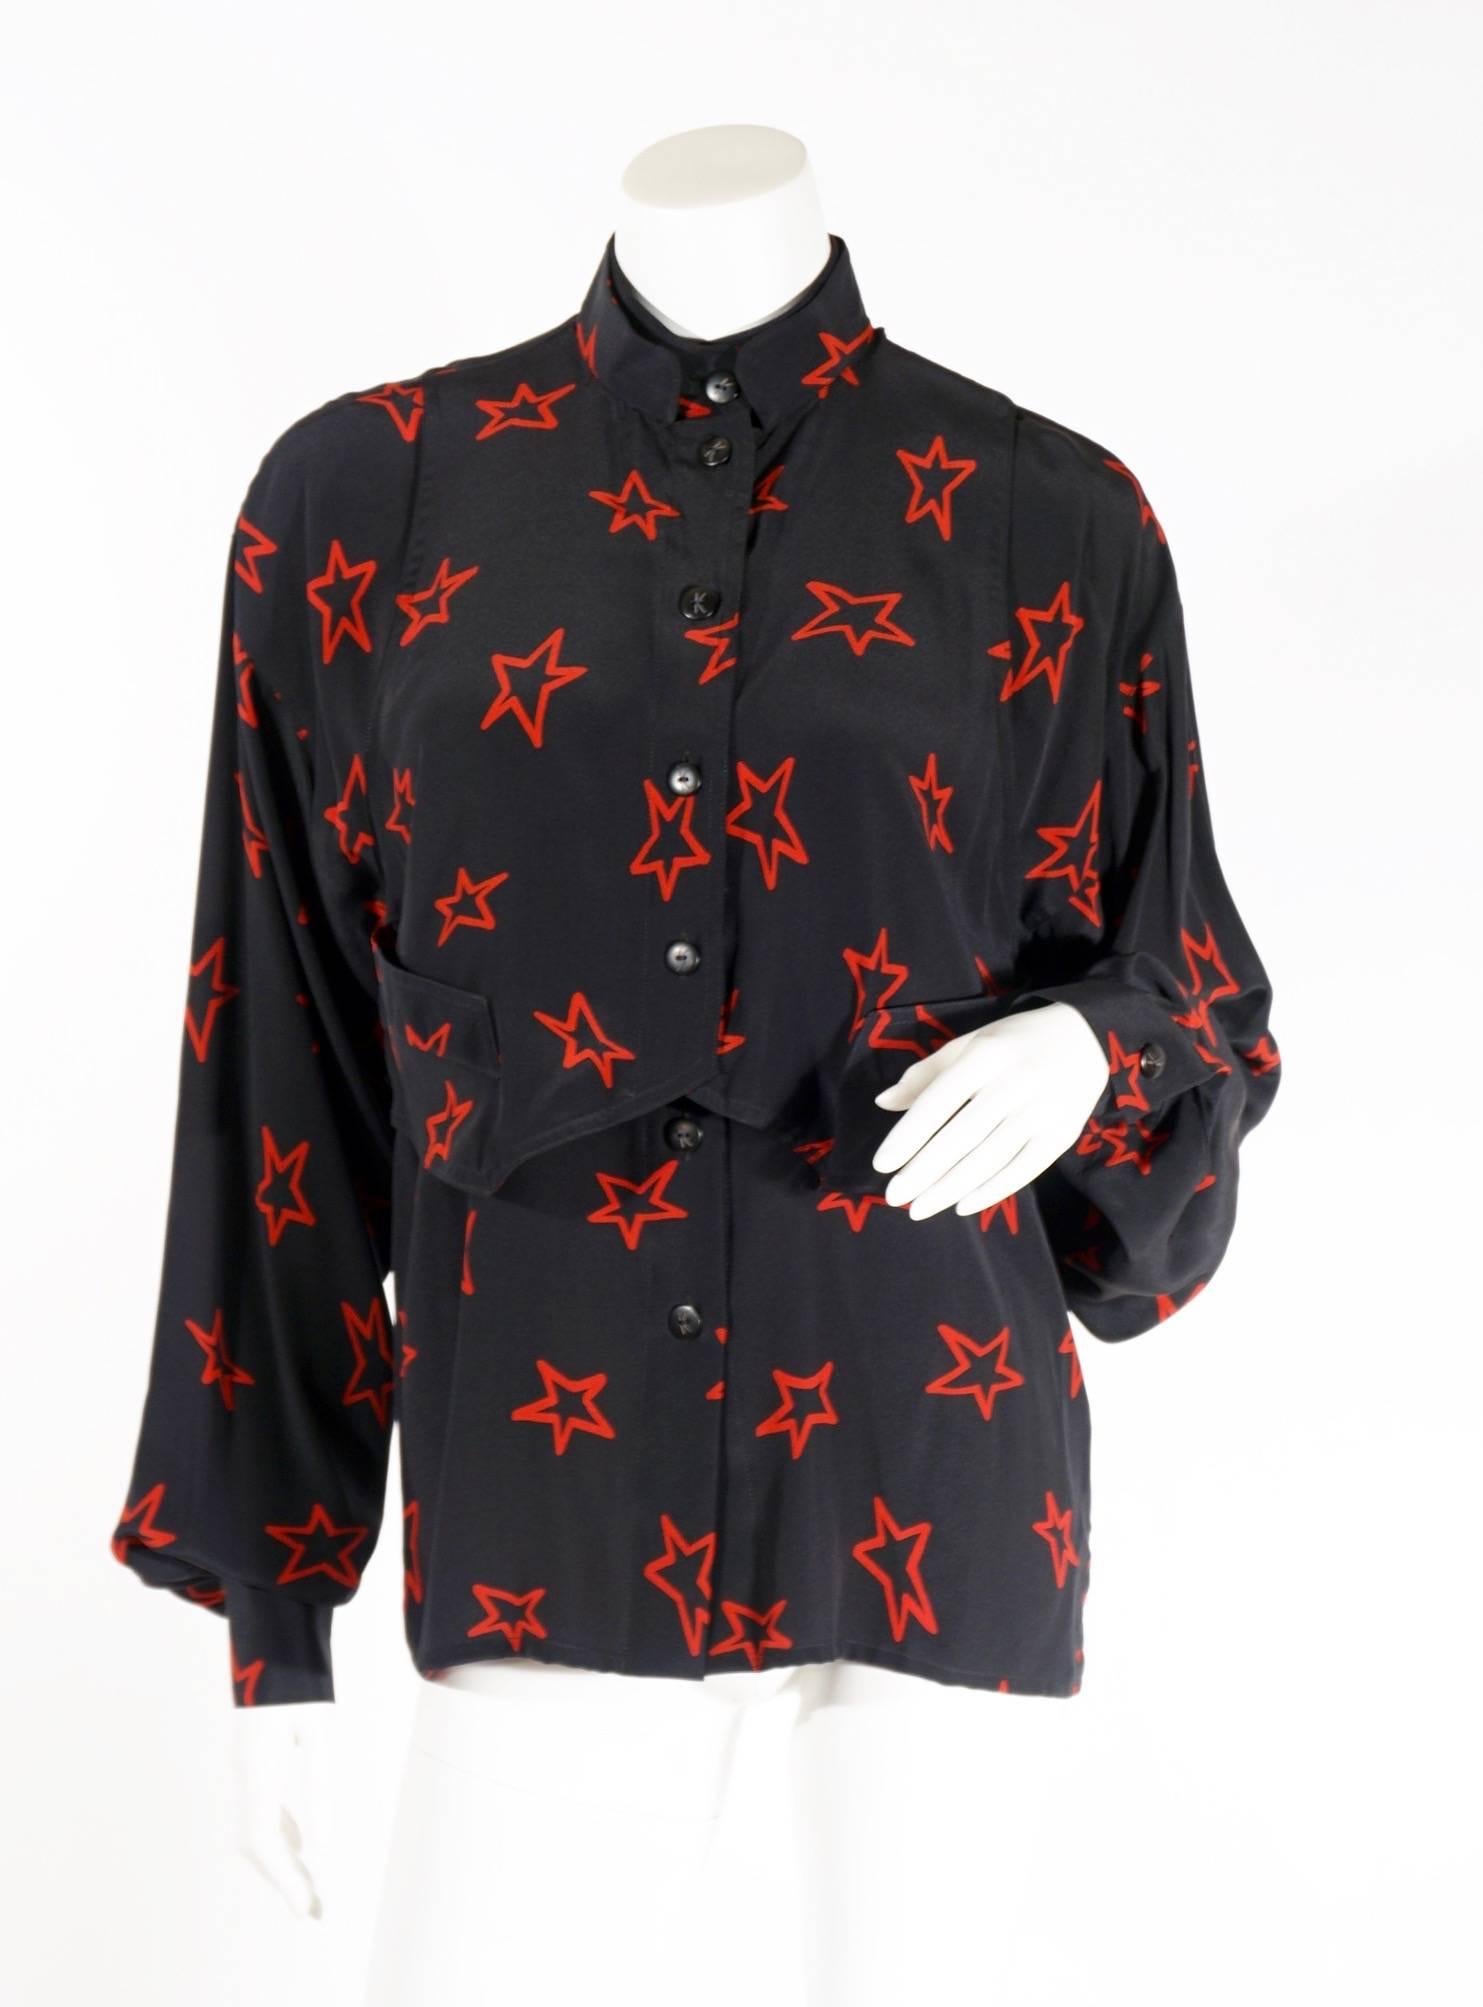 Vintage Krizia silk printed blouse. This flowy top features a super cool star print, double layer ” vest” detail, buttons up the front and at wrist. Perfectly paired to dress up or down. Excellent condition. Can be seen on vetta's website on